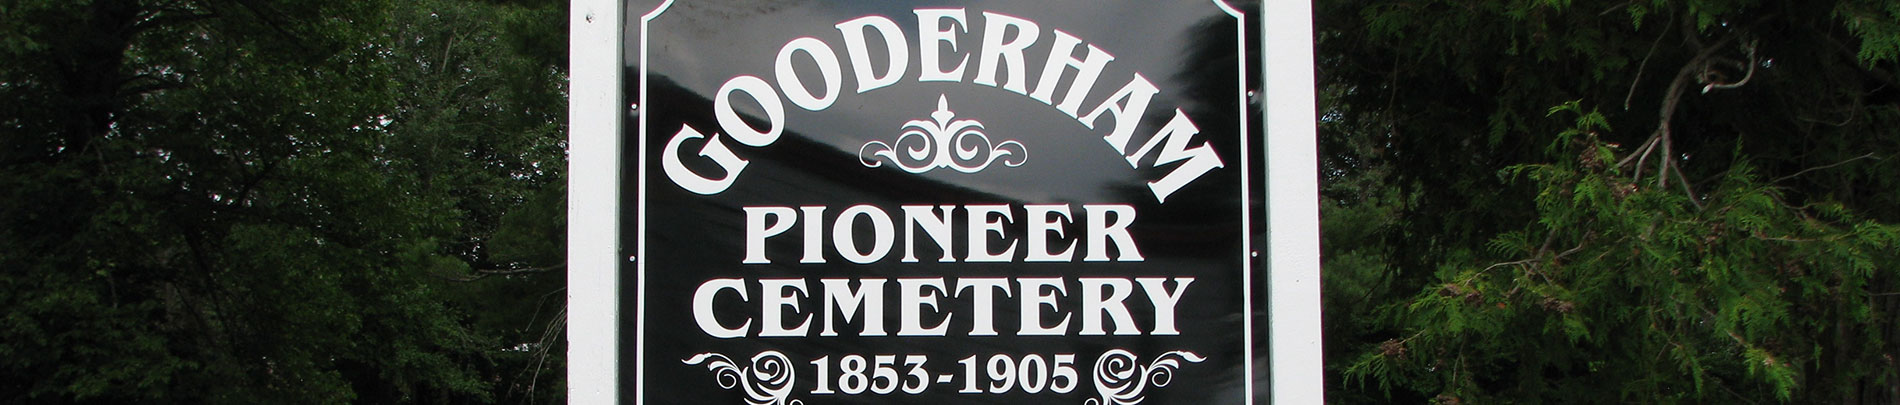 A sign that reads Gooderham Pioneer Cemetery.